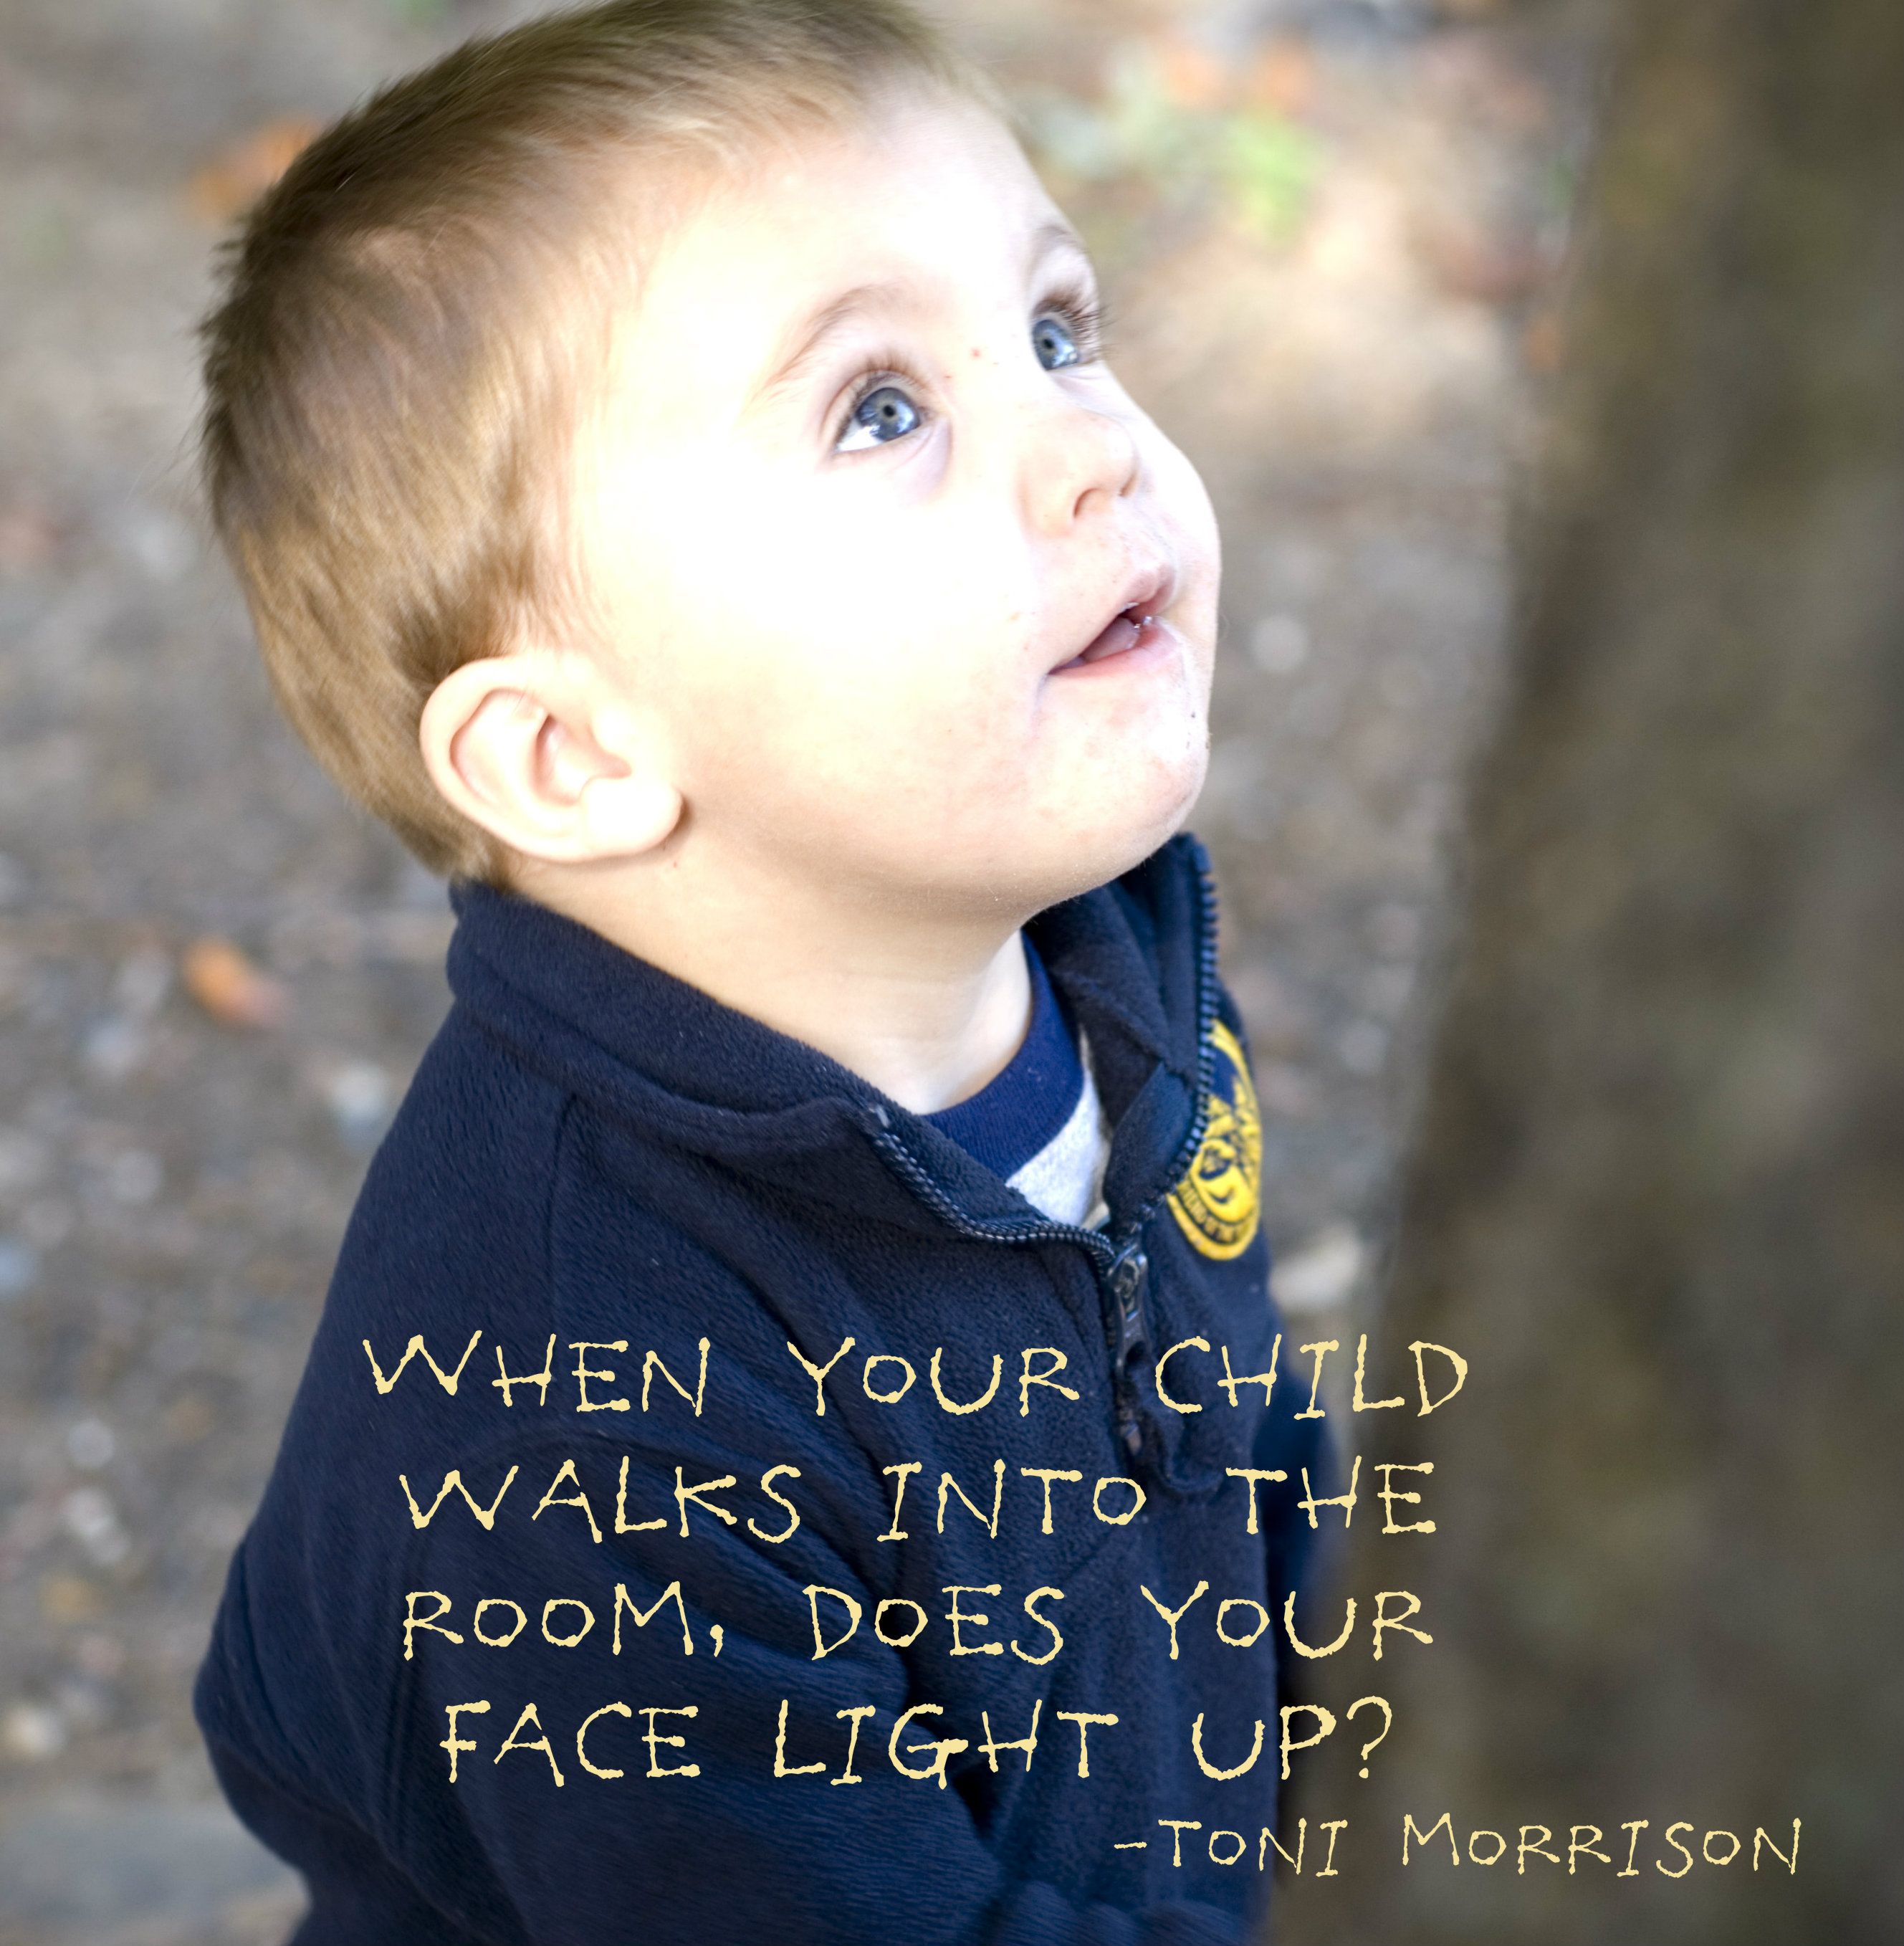 When your child walks into the room, does your face light up? Quote by Toni Morrison